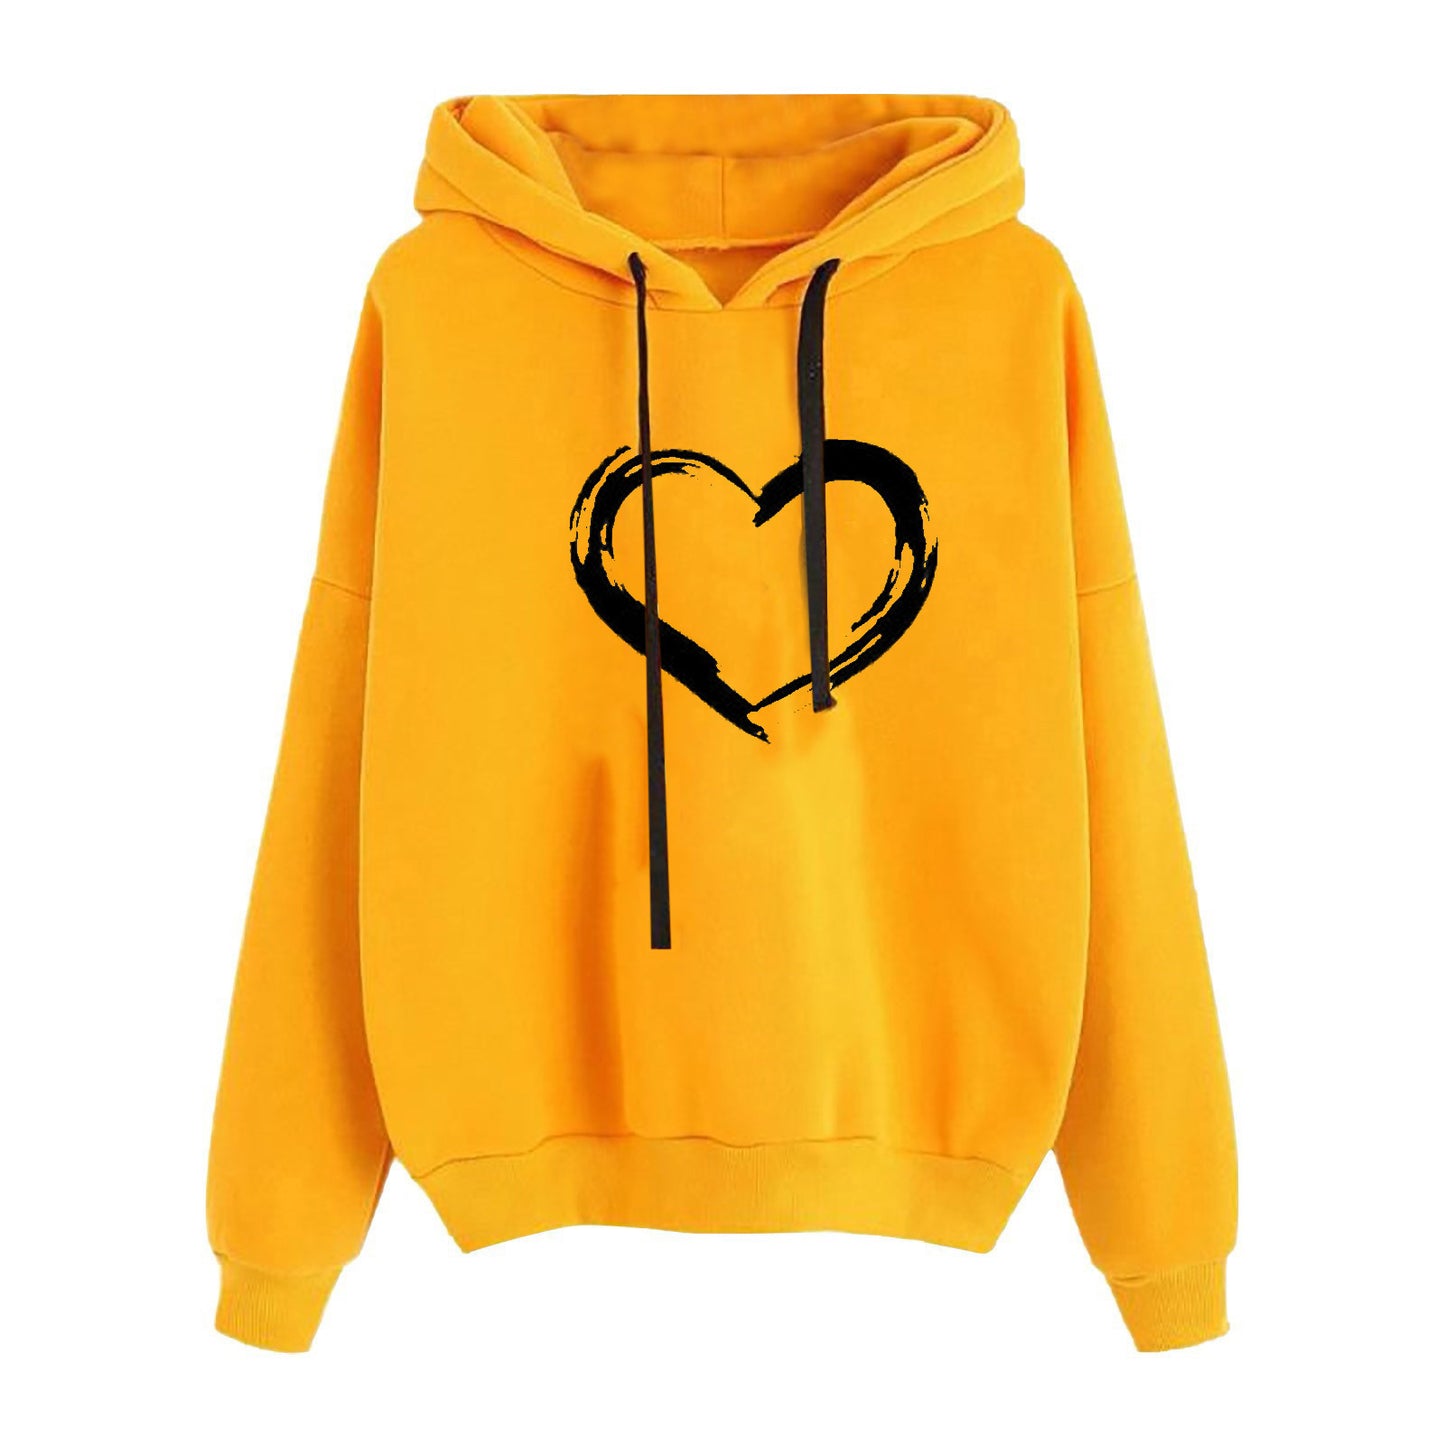 Padded hoodie for men and women